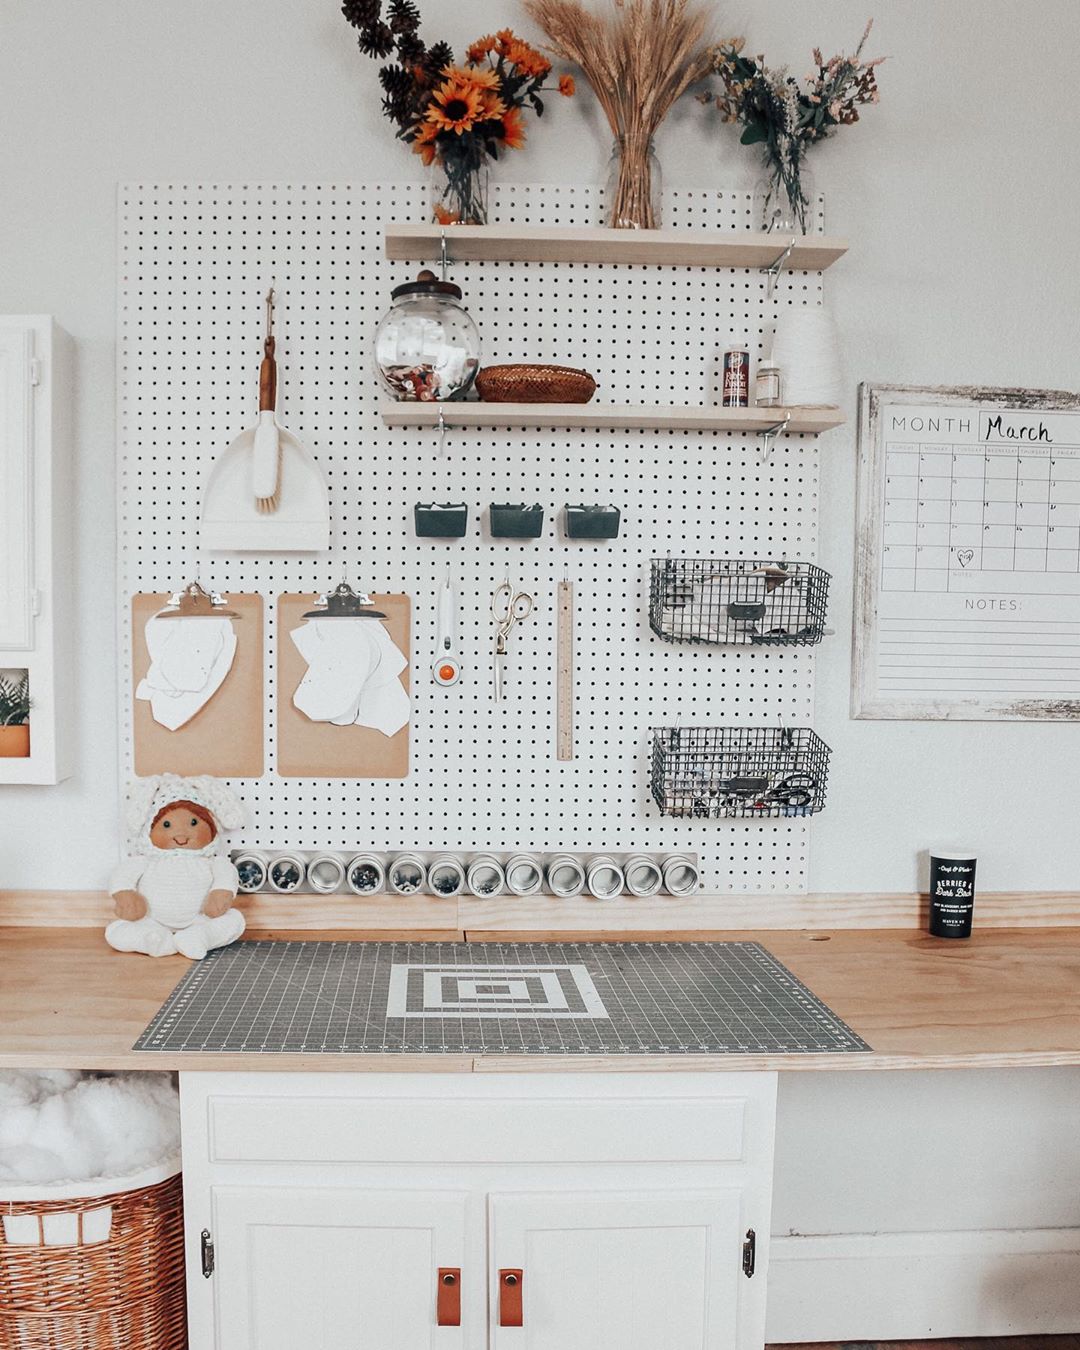 20 Ideas for Designing a Craft Room at Home